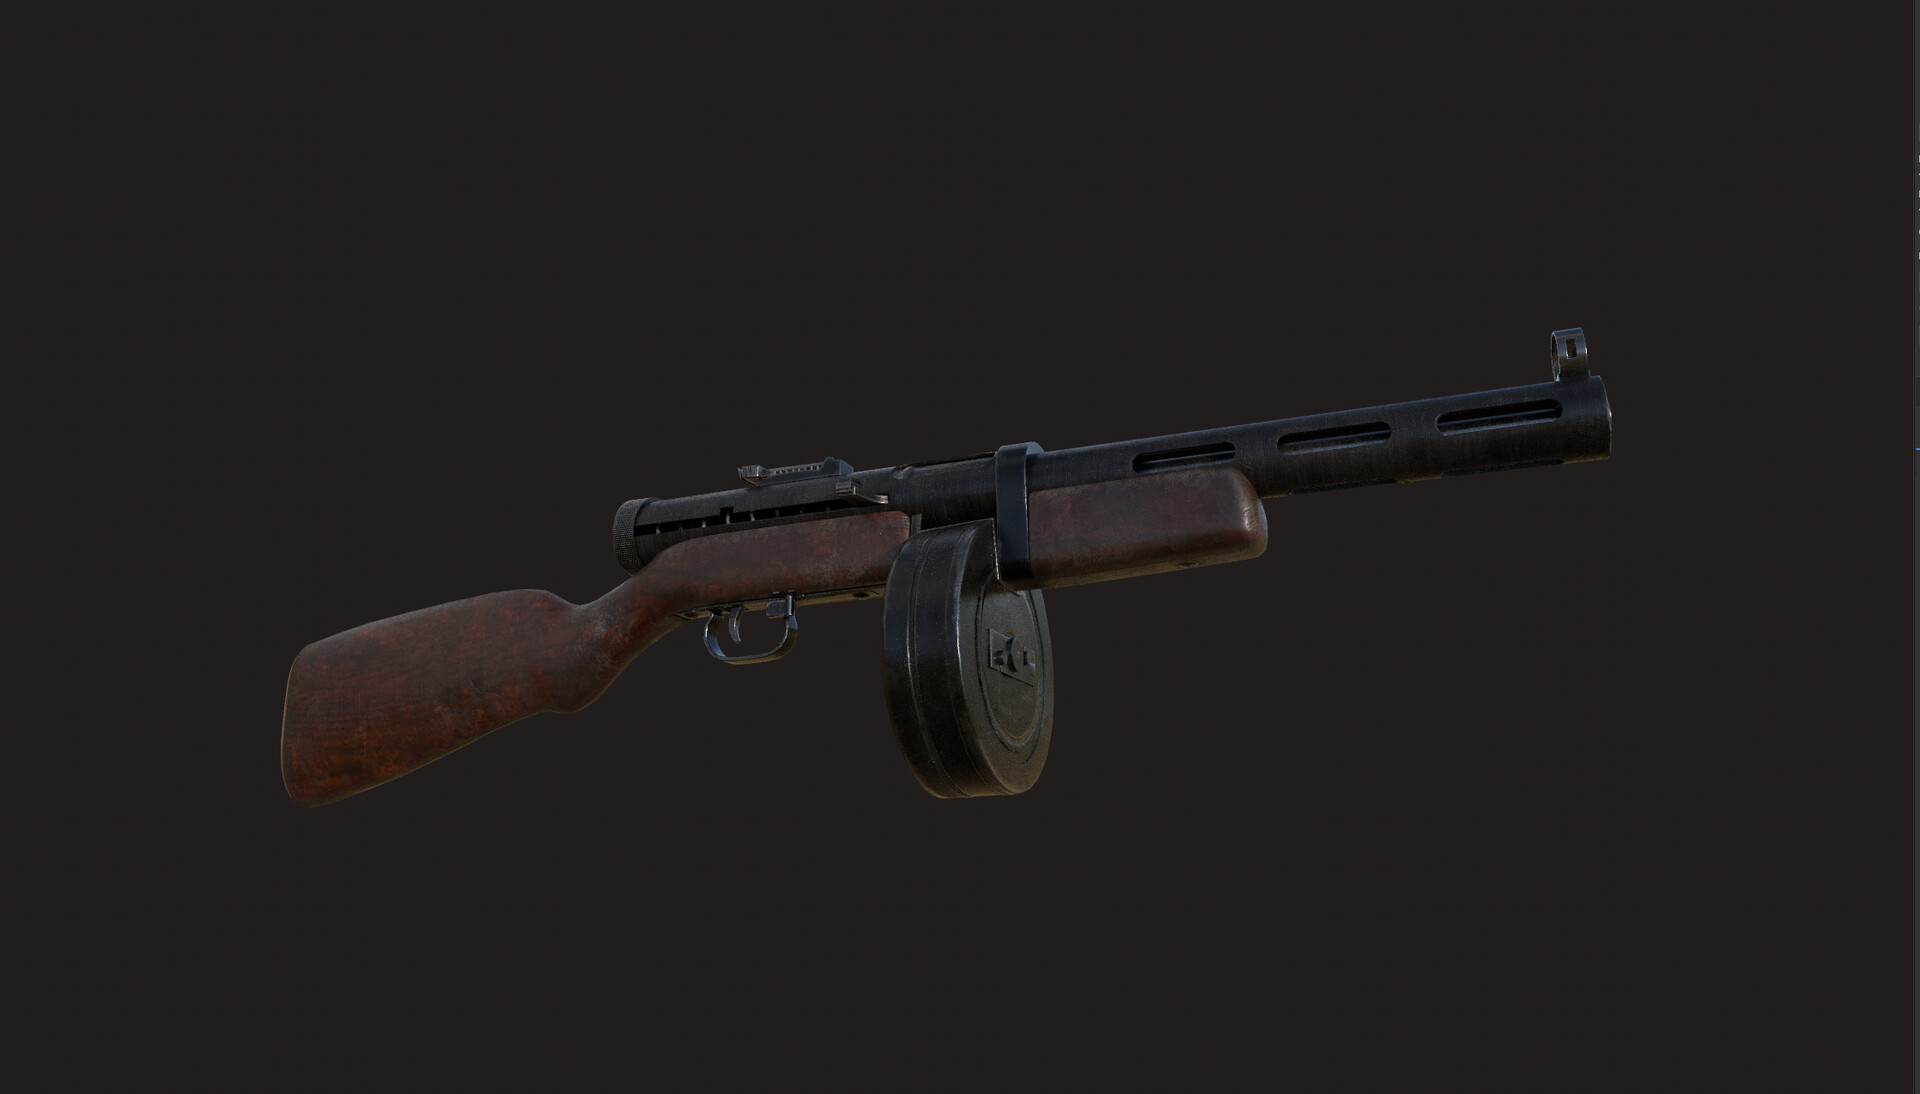 ArtStation Weapons of the Second World War. Red Army PPD-40 submachine  gun.